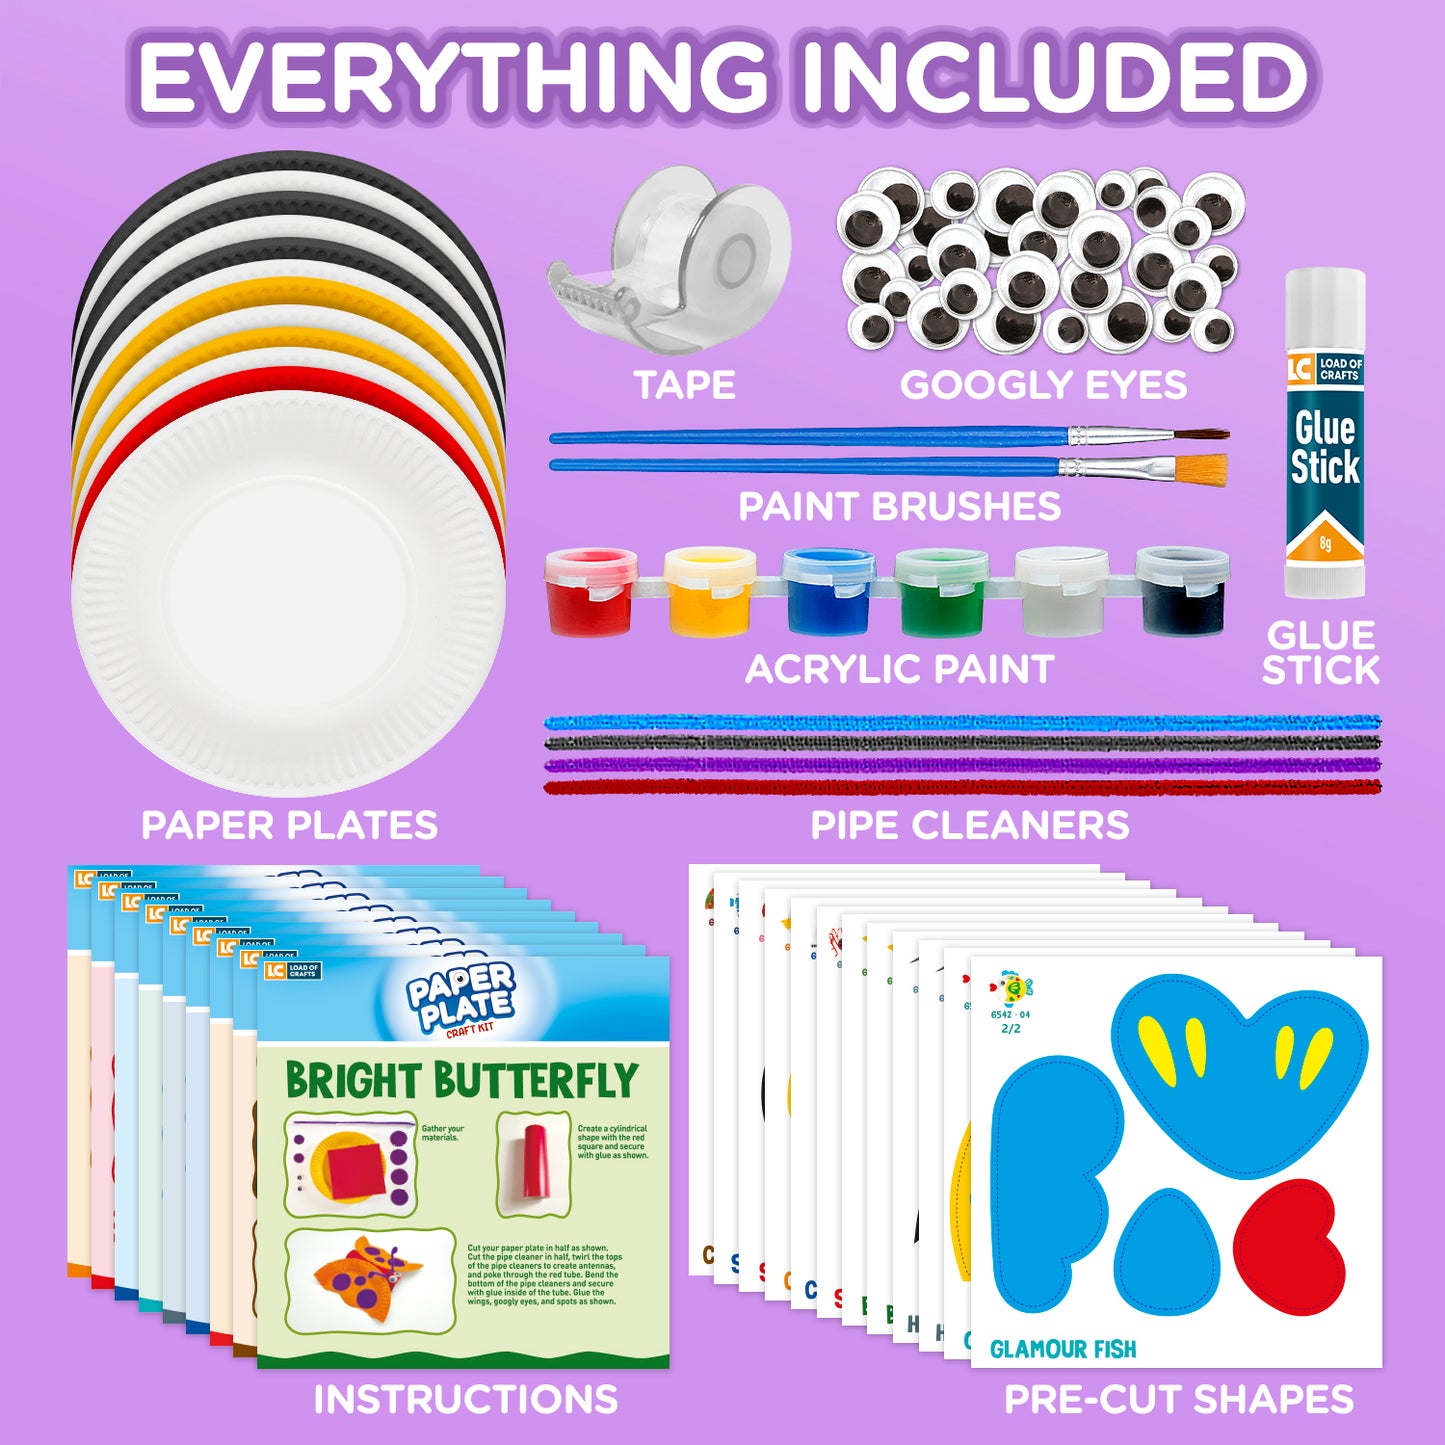 Arts and Crafts for Toddlers, Create Animal Crafts from Paper Plates, Includes All Supplies and Instructions, Best Craft Project Kit for Ages 2-5